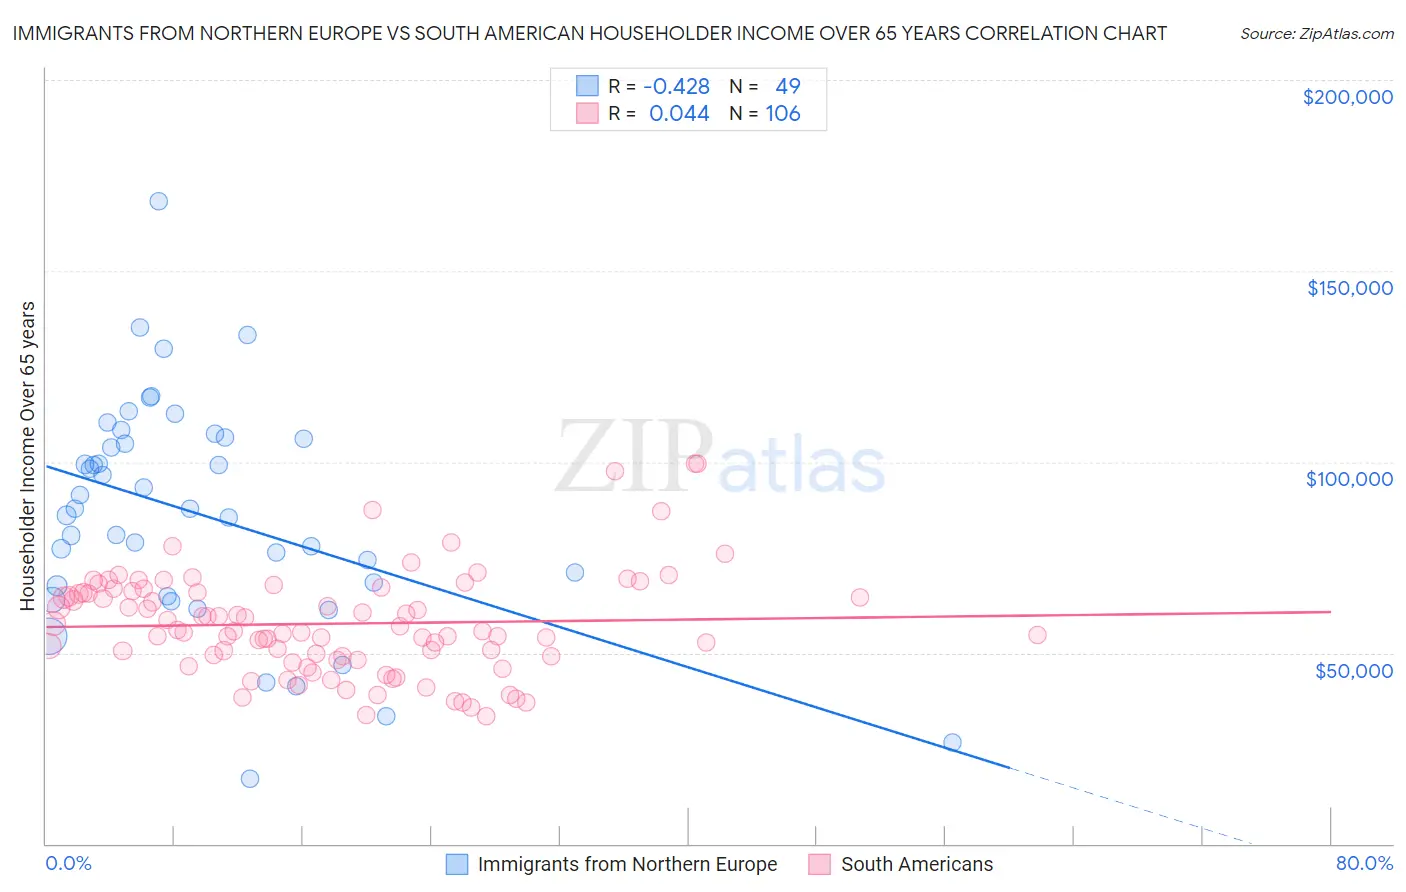 Immigrants from Northern Europe vs South American Householder Income Over 65 years